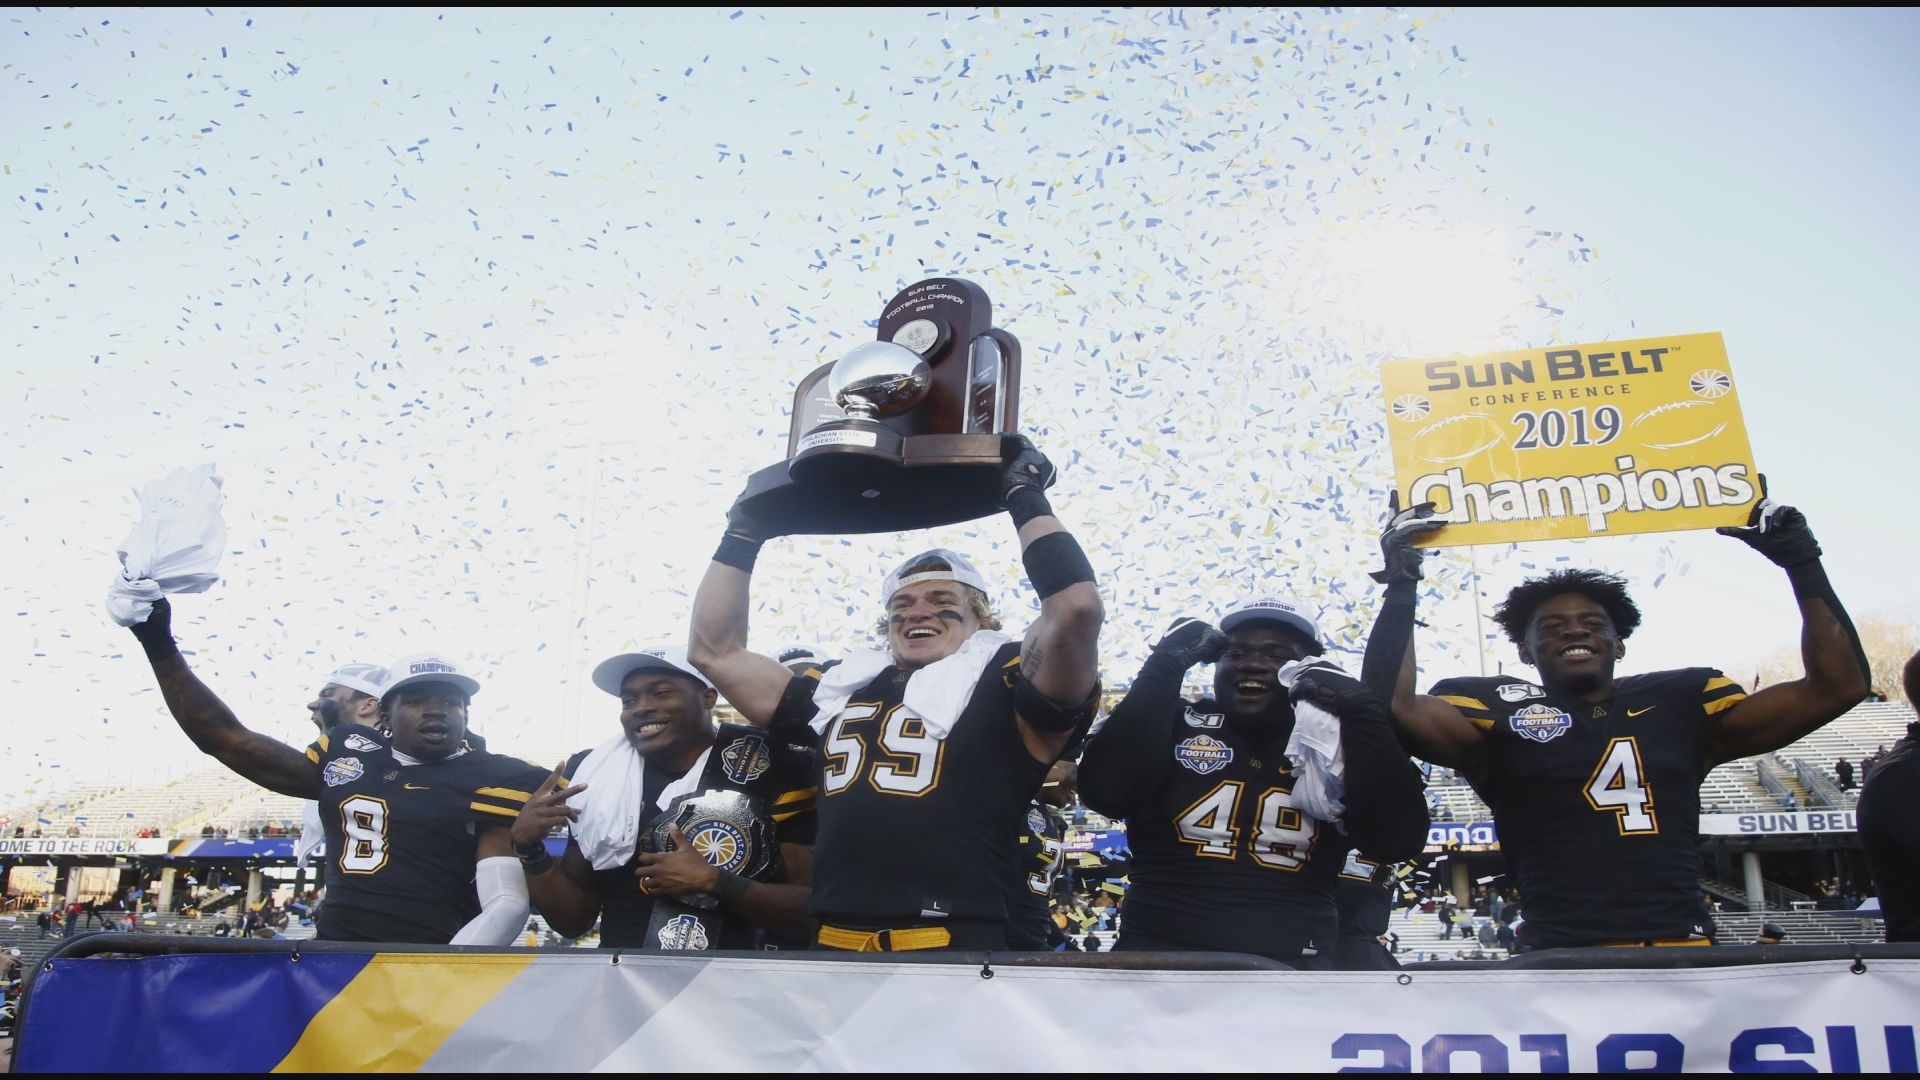 App State wins Sun Belt Championship with win over Louisiana